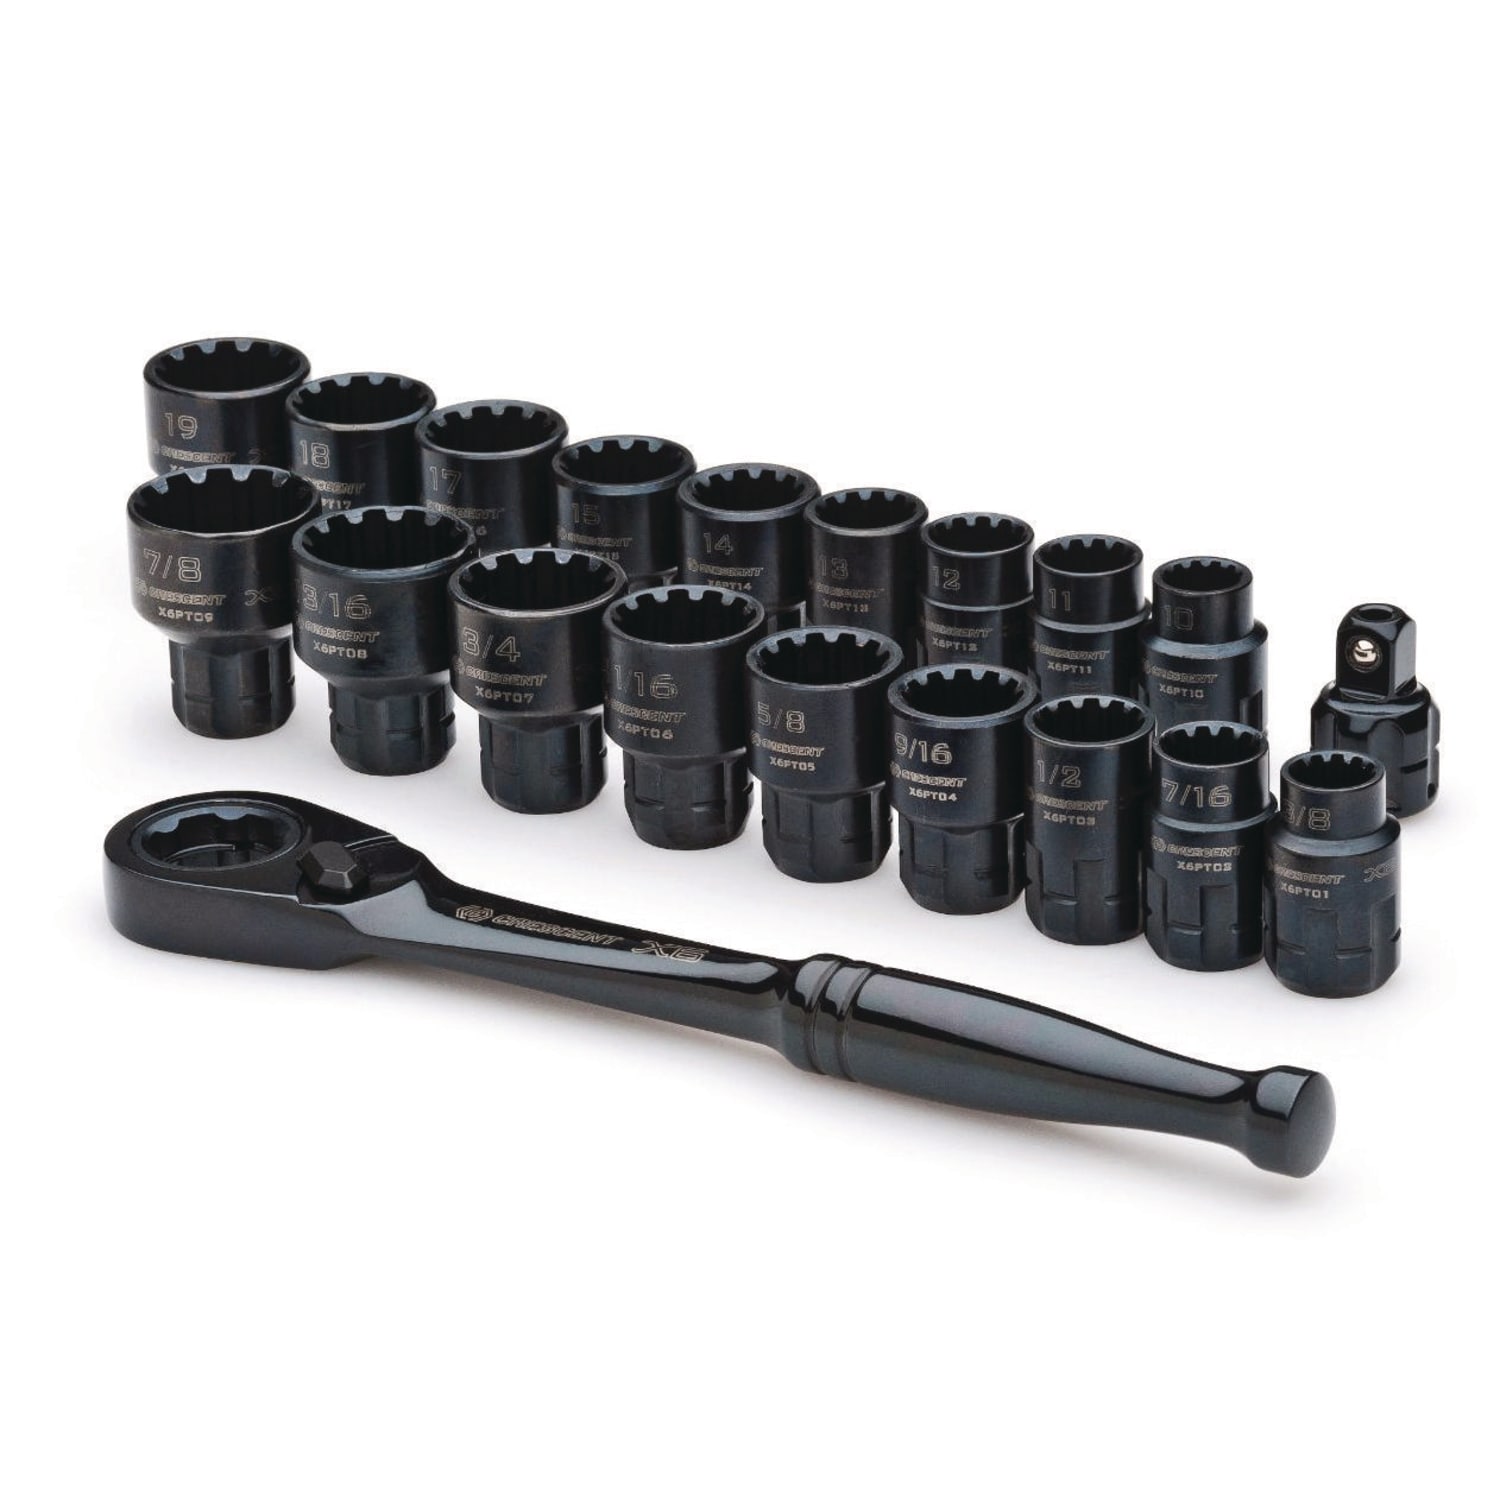 Crescent 20-Piece Standard (SAE) and Metric 3/8-in Drive 12-point